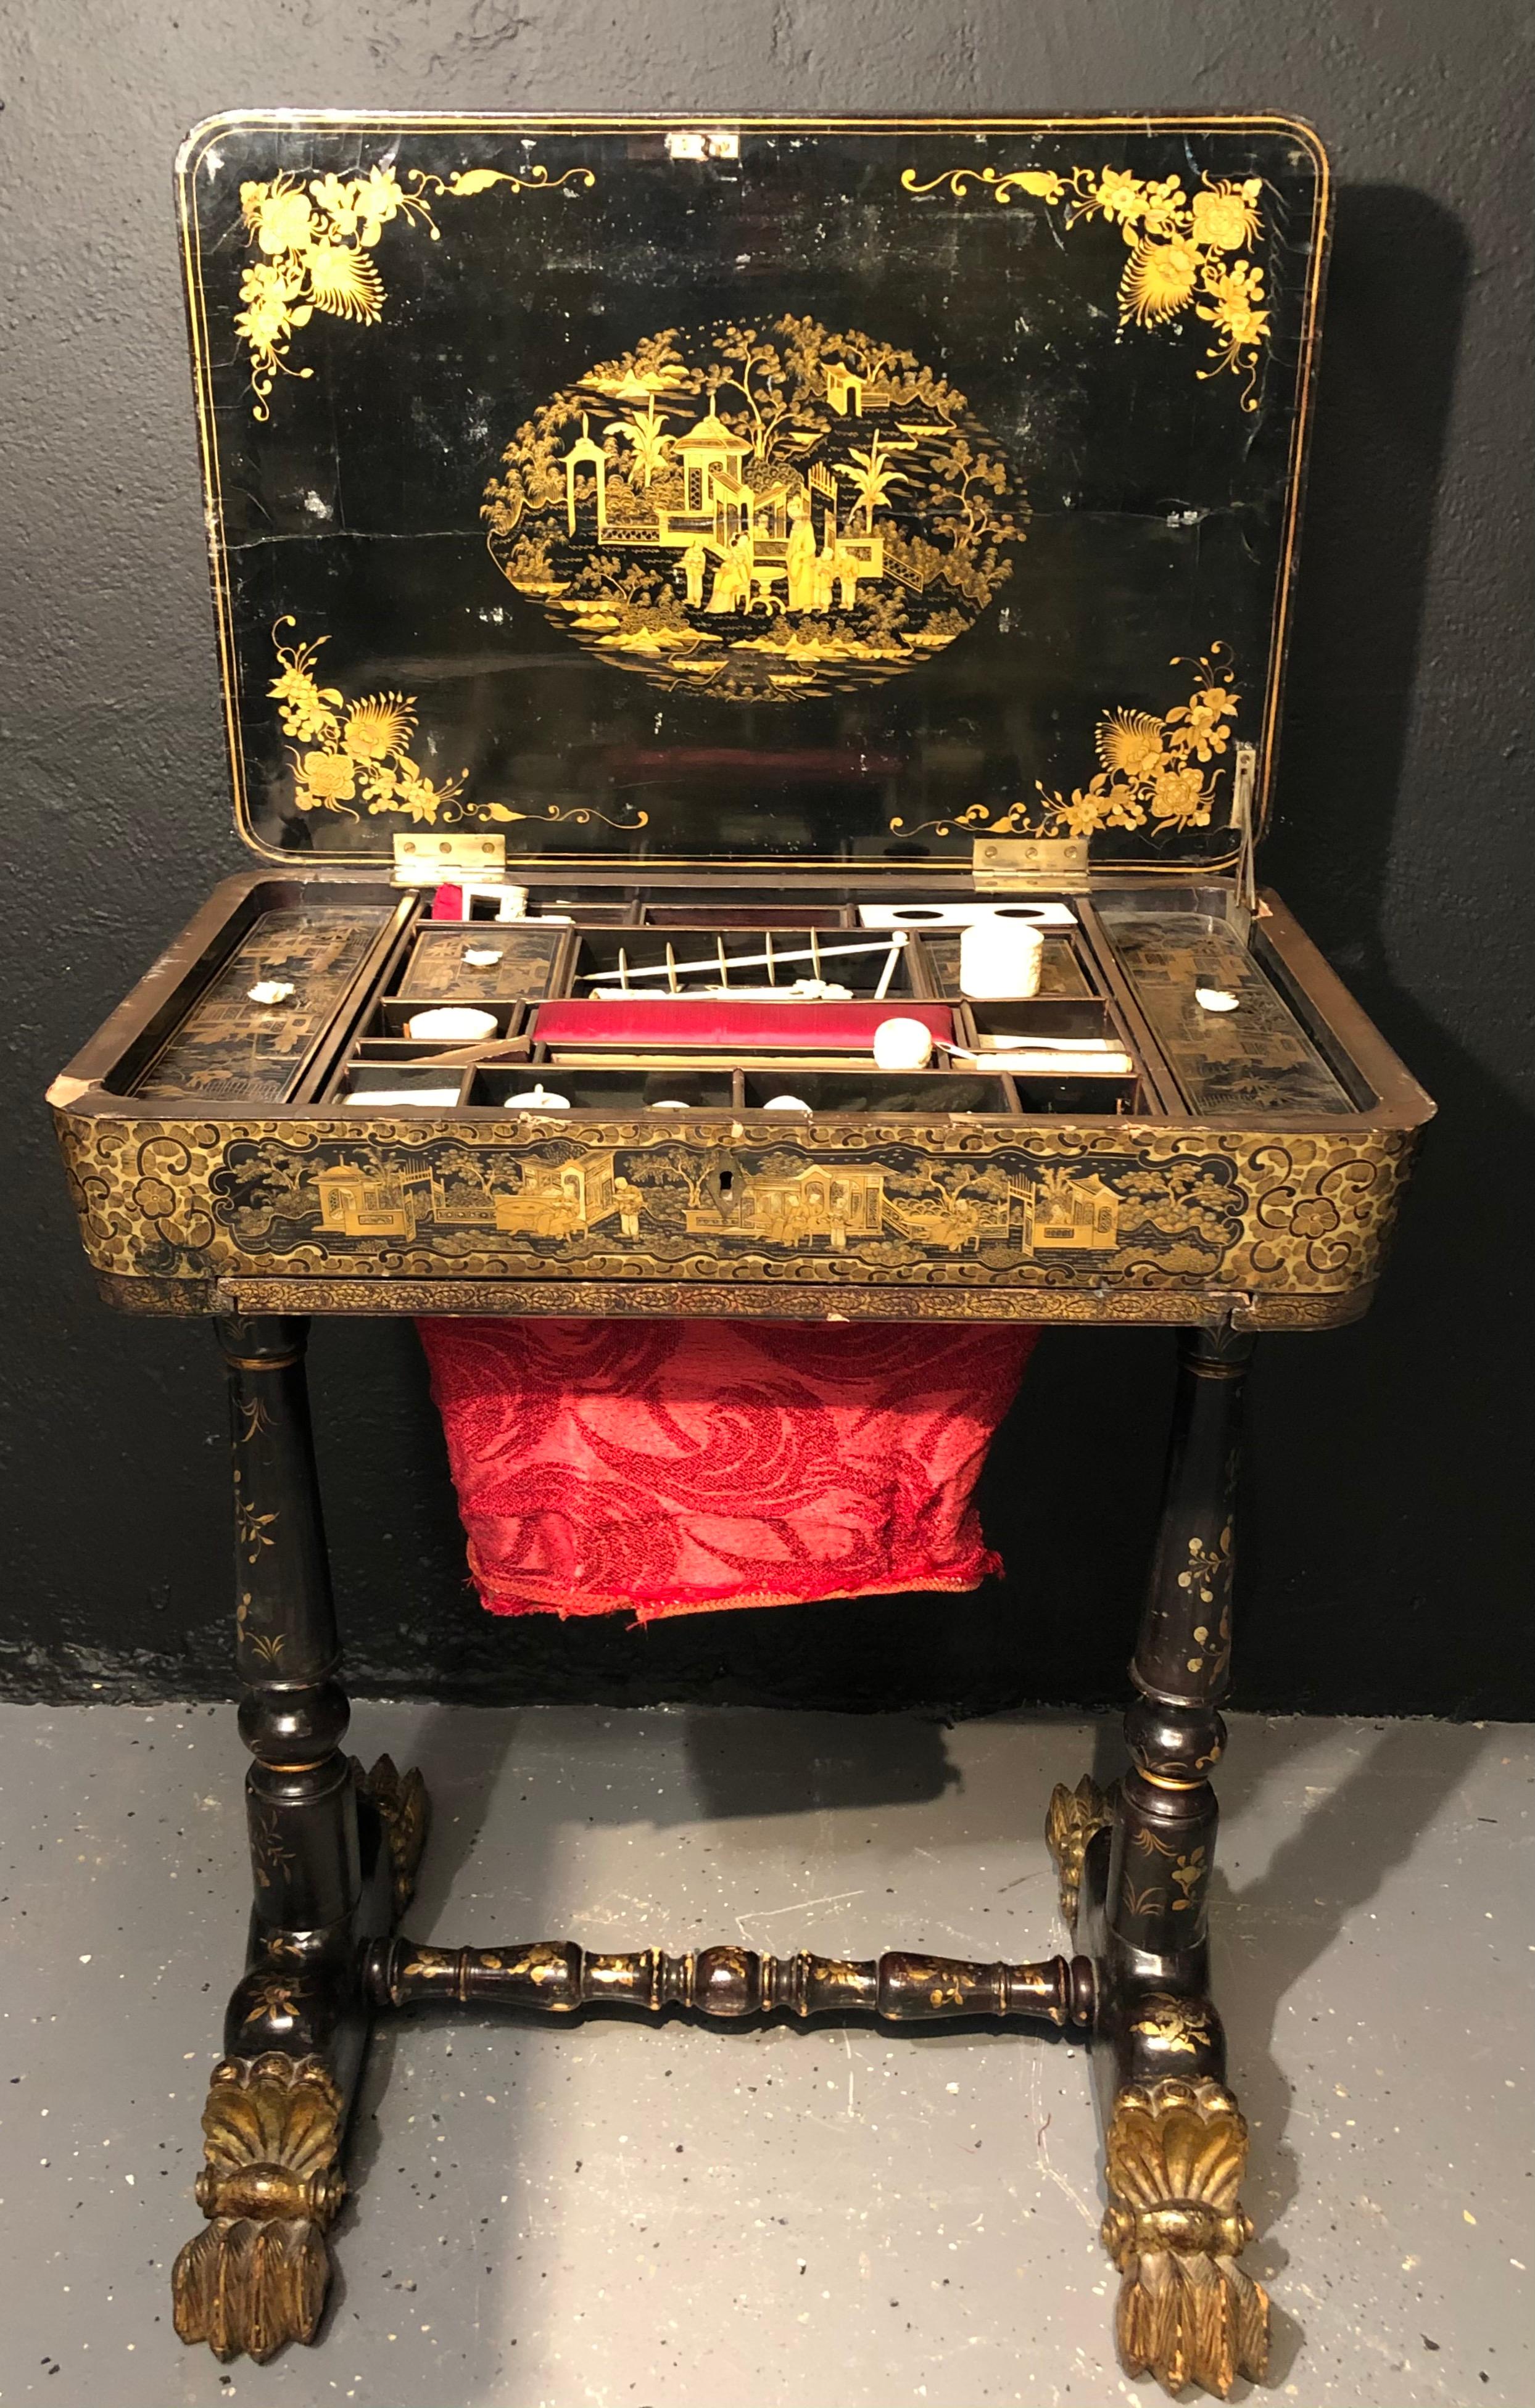 Hand-Painted 19th Century Regency Chinoiserie Decorated Sewing Stand with Elaborate Detail